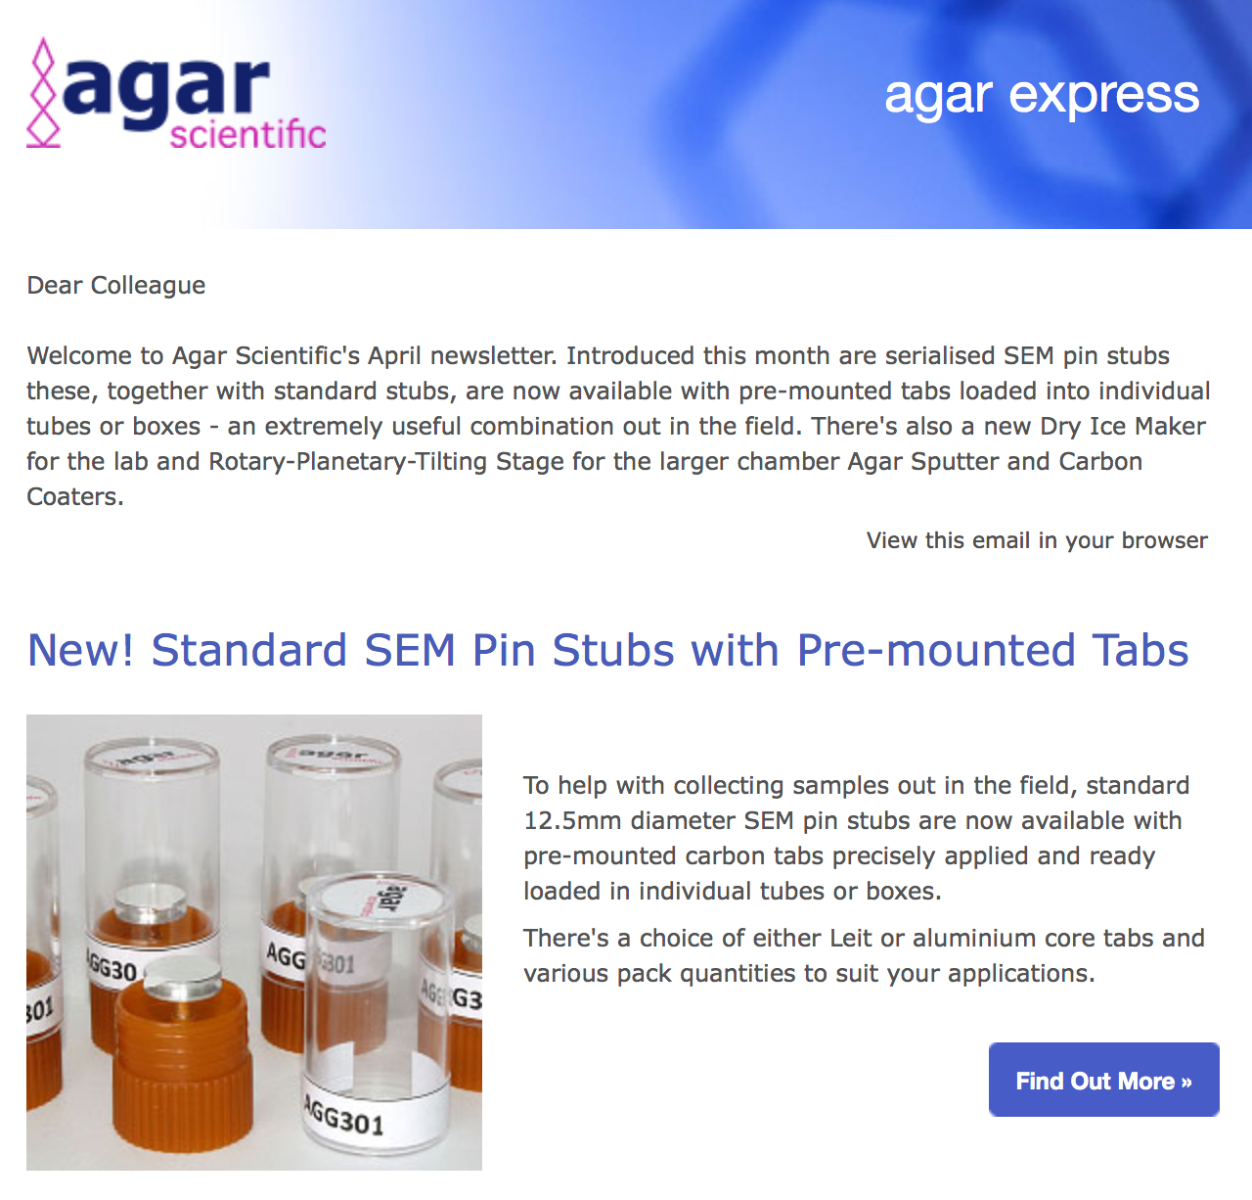 Agar Express April 2018 - new serialised SEM stubs, pre-mounted tabs, Dry Ice Maker & more...